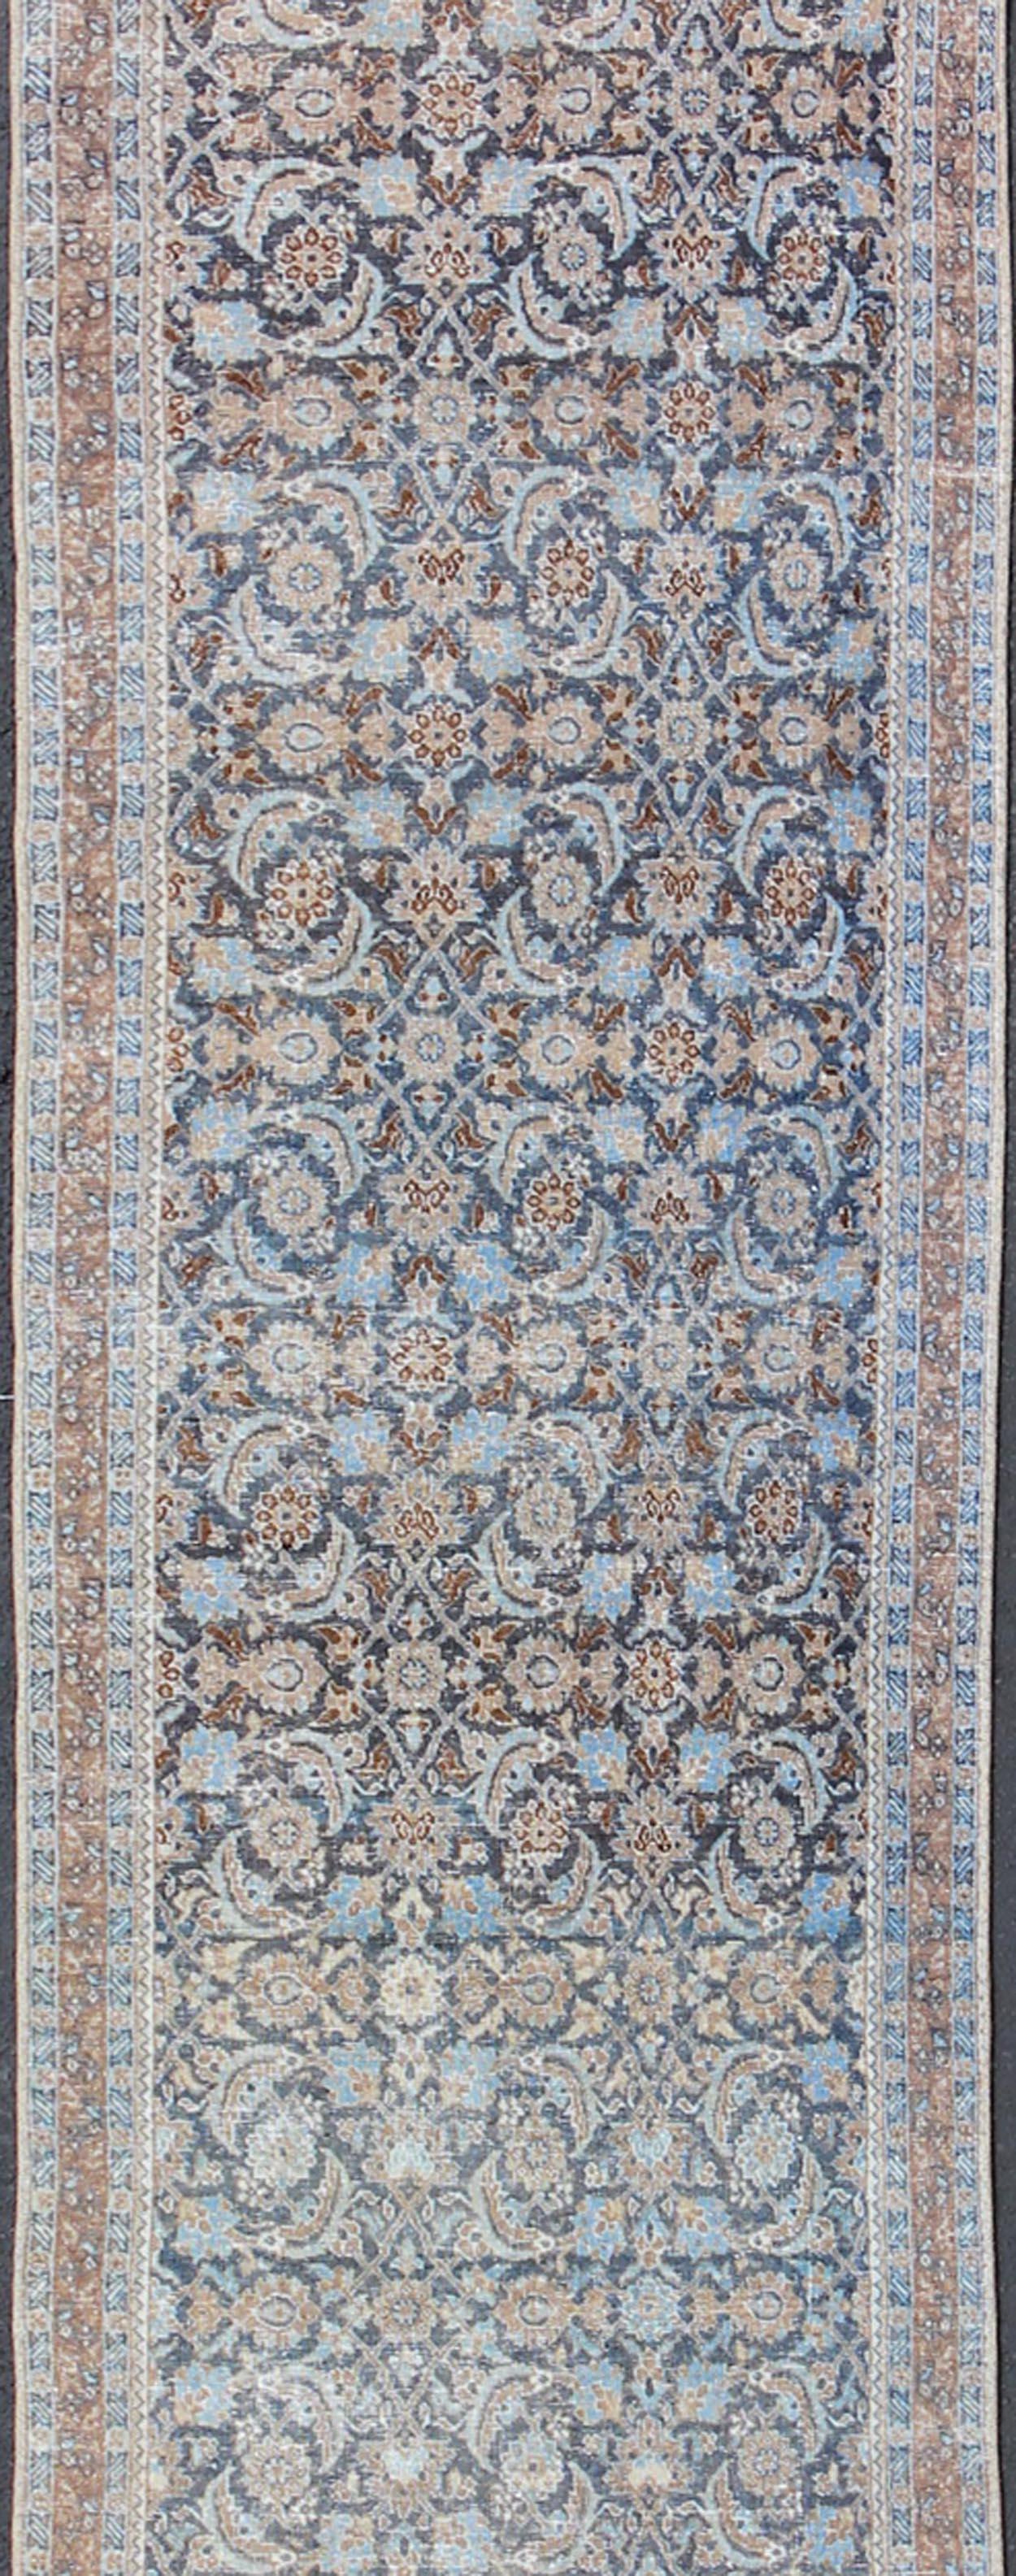 Vintage Persian Tabriz Runner with Ornate Floral Design in Blue and Taupe In Good Condition For Sale In Atlanta, GA